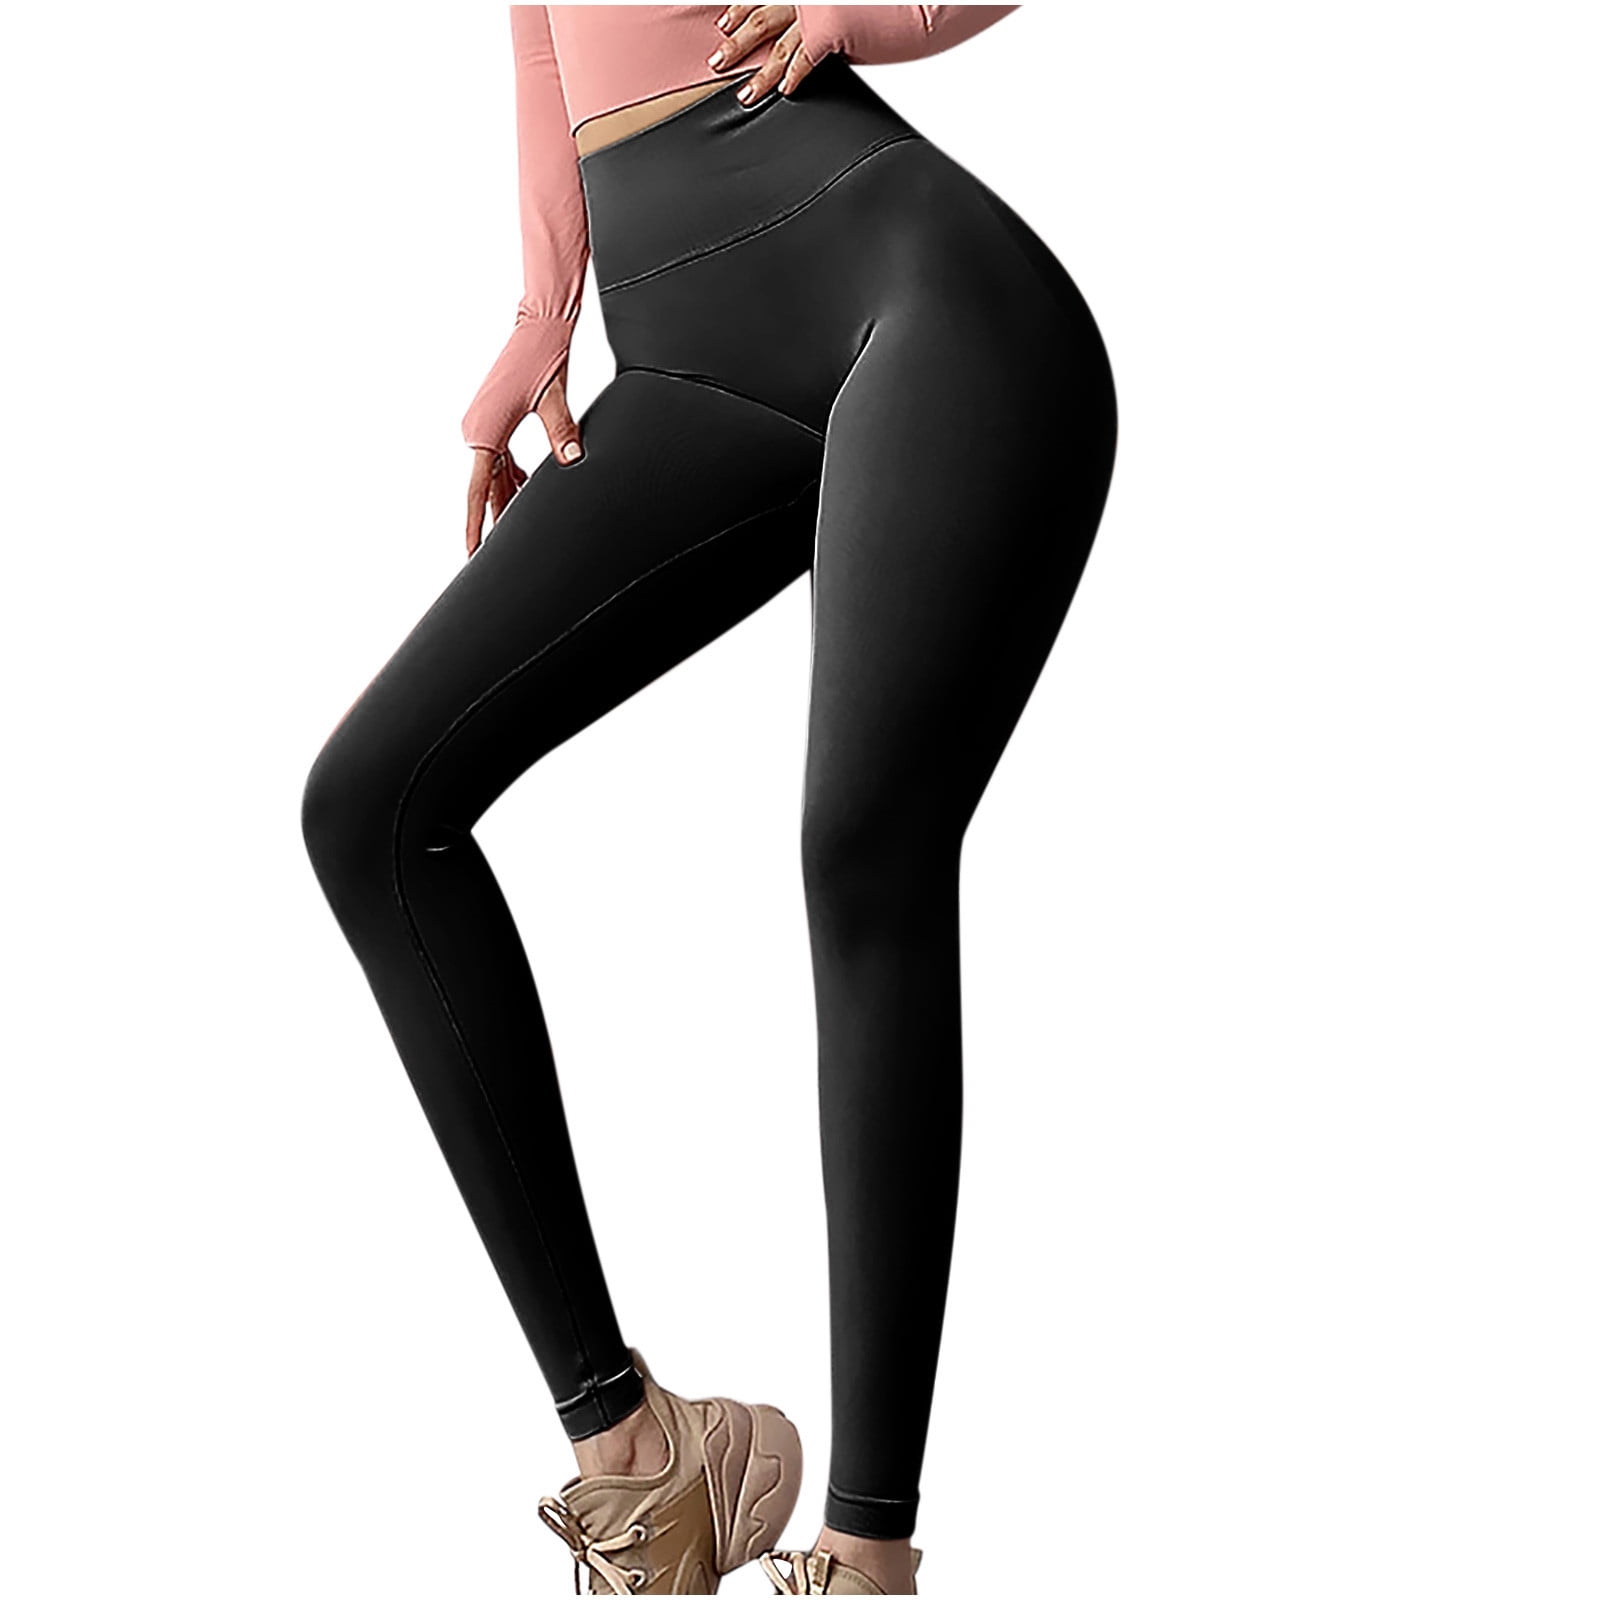 VALANDY 5 Pack Butter Soft Womens Leggings - High Waisted Non See Through Tummy  Control Yoga Pants for Workout Running Summer, 5 Packs-black/Dark  Gray/Light Grey/Navy/White, L-XL price in Saudi Arabia